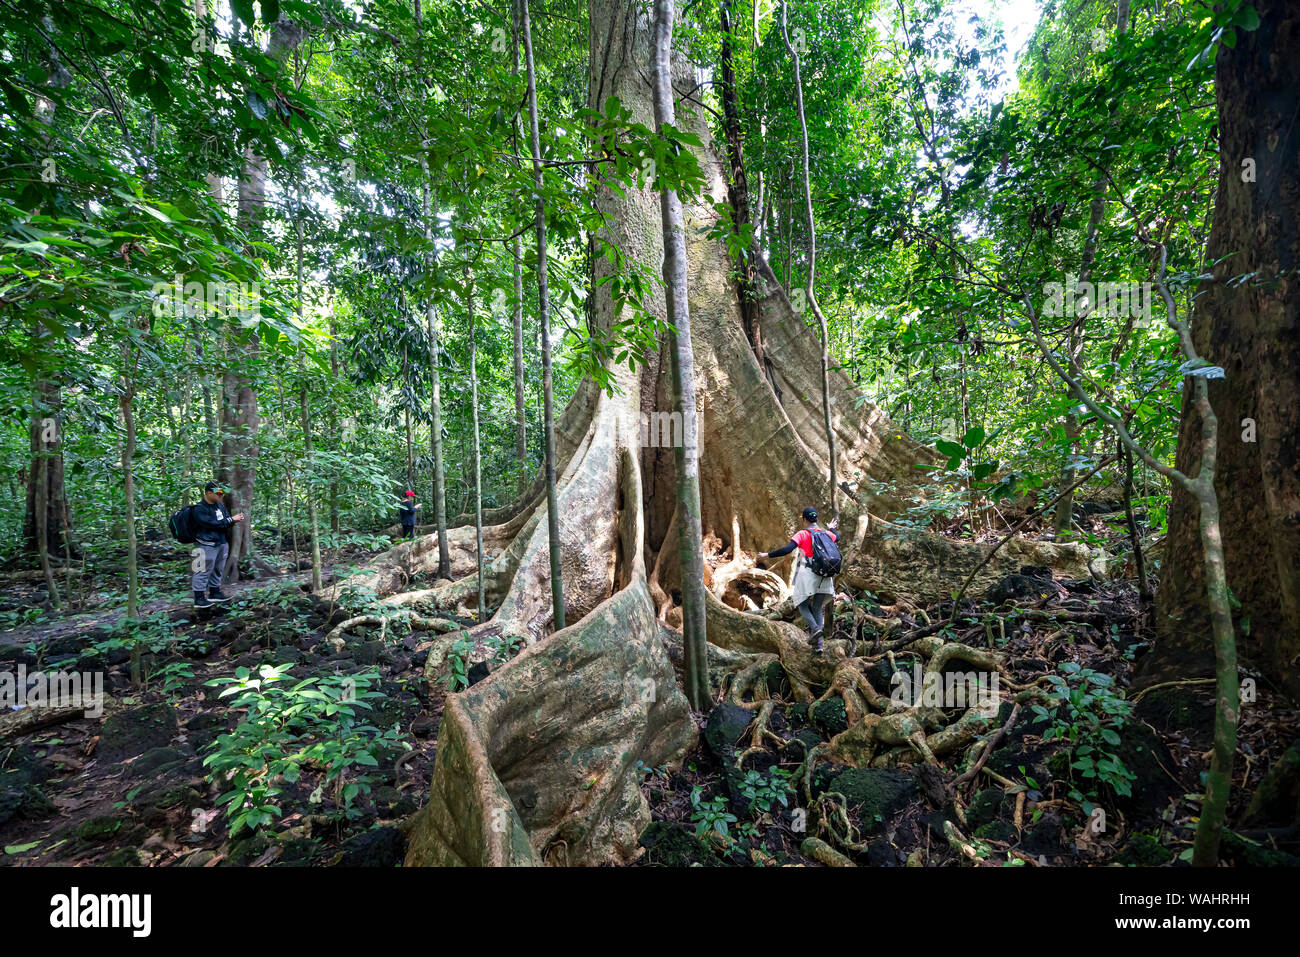 Nam Cat Tien National Park, Dong Nai Province, Vietnam, August 17, 2019: Female tourists are exploring rainforests and Giant tree Tetrameles nudiflora Stock Photo